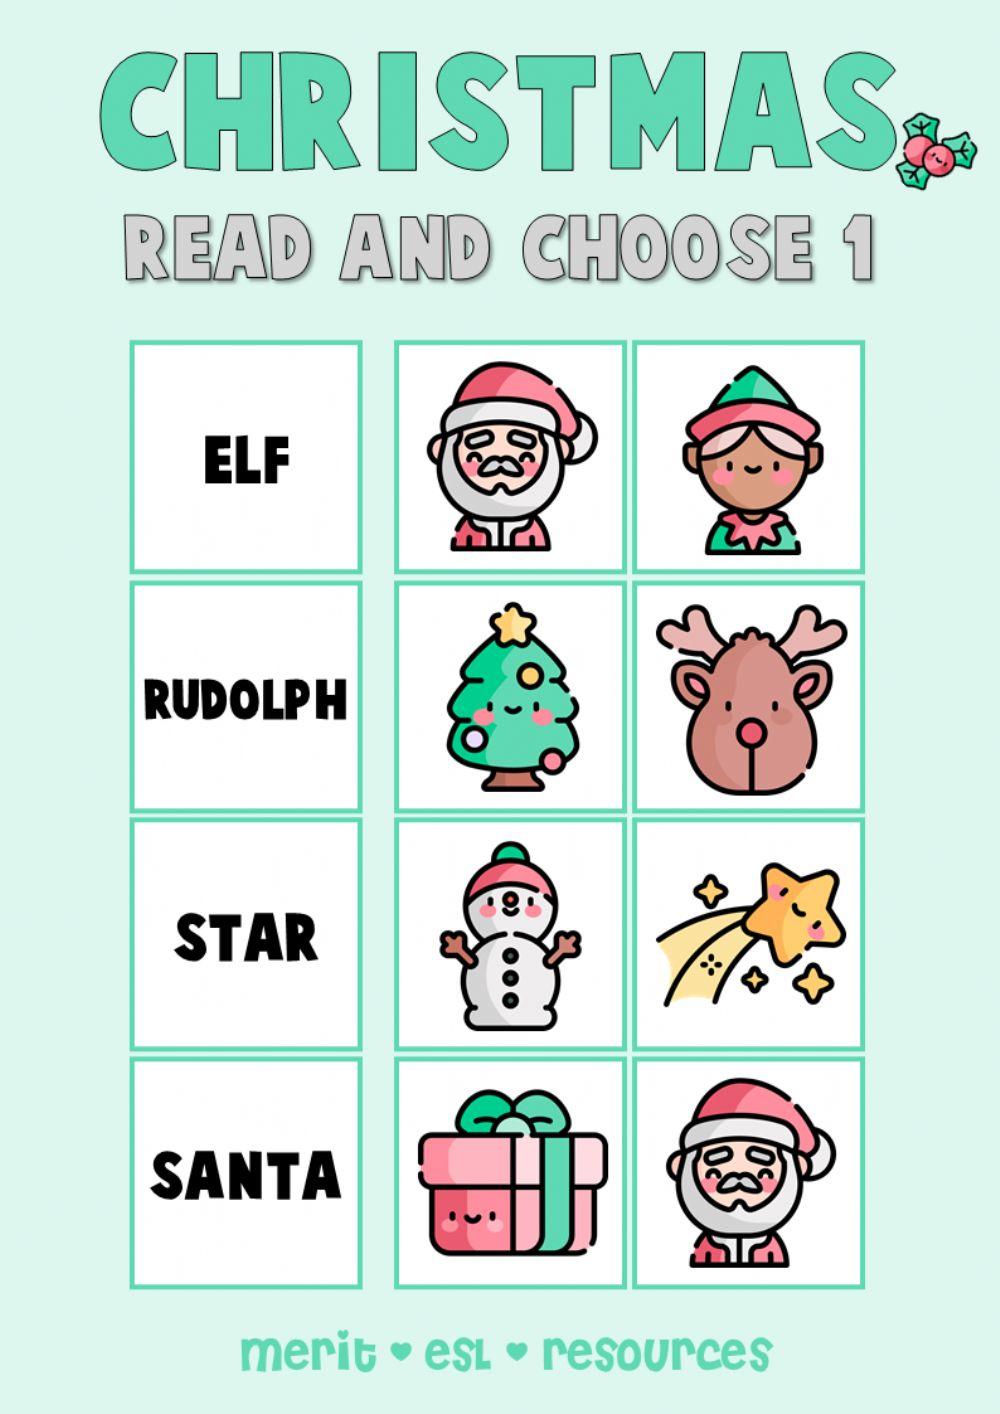 Christmas - Read and choose 1